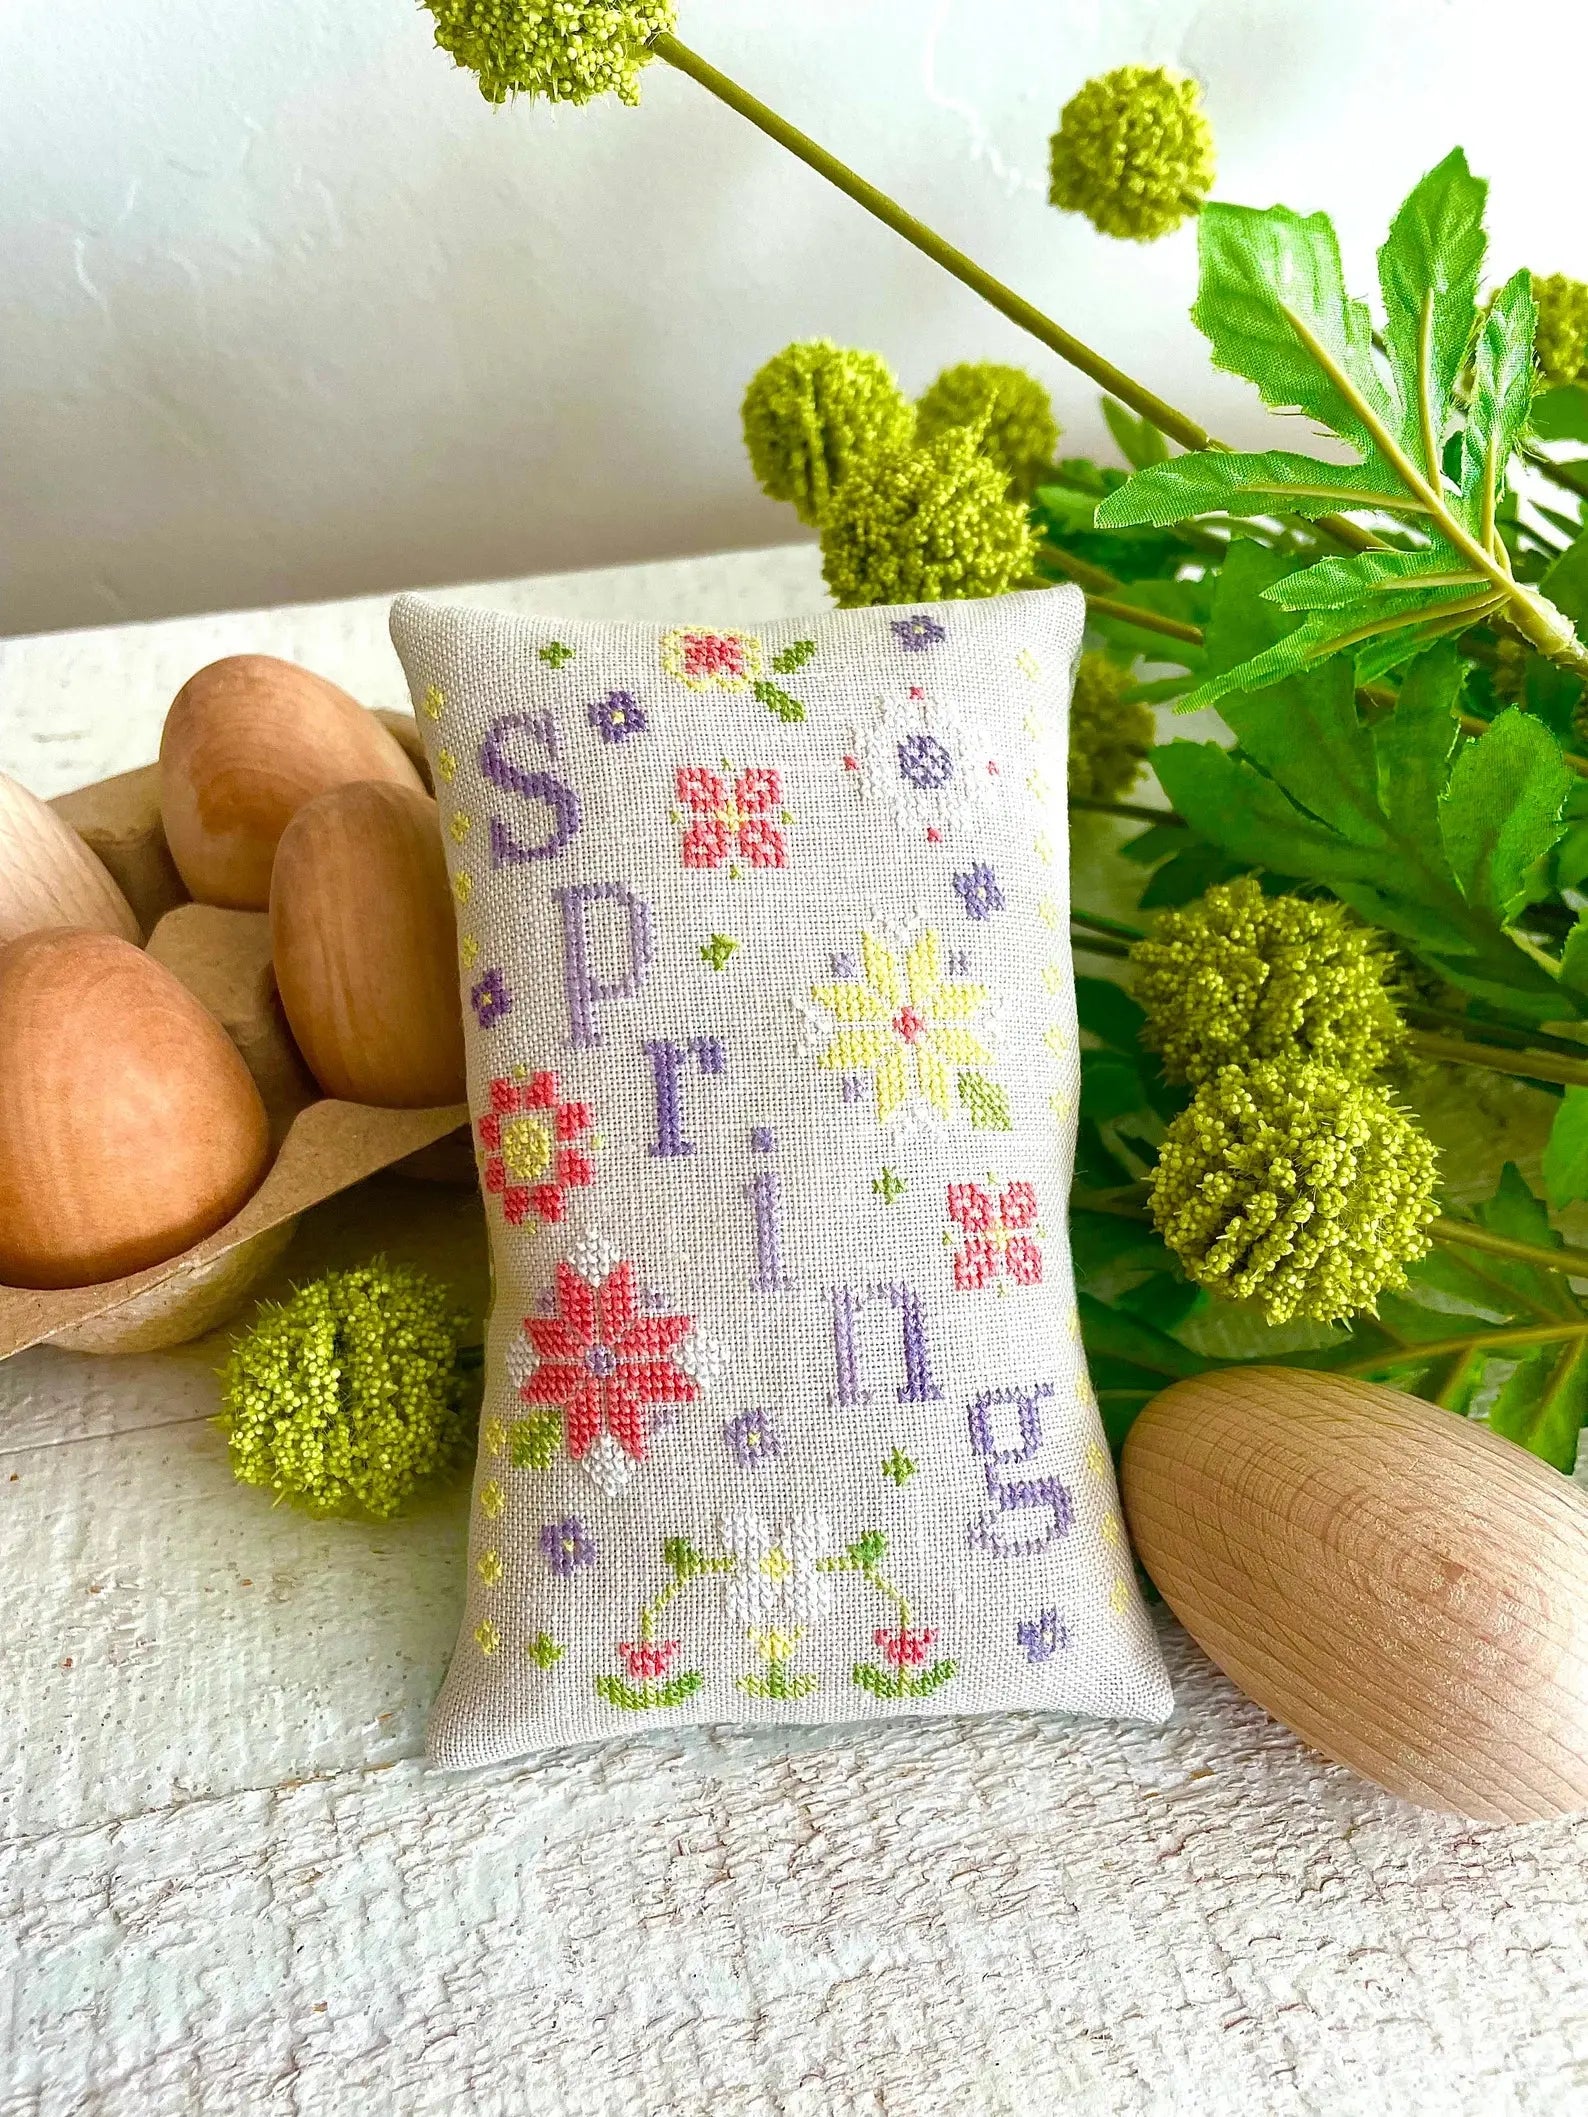 Spring by Emily Call Stitching Emily Call Stitching